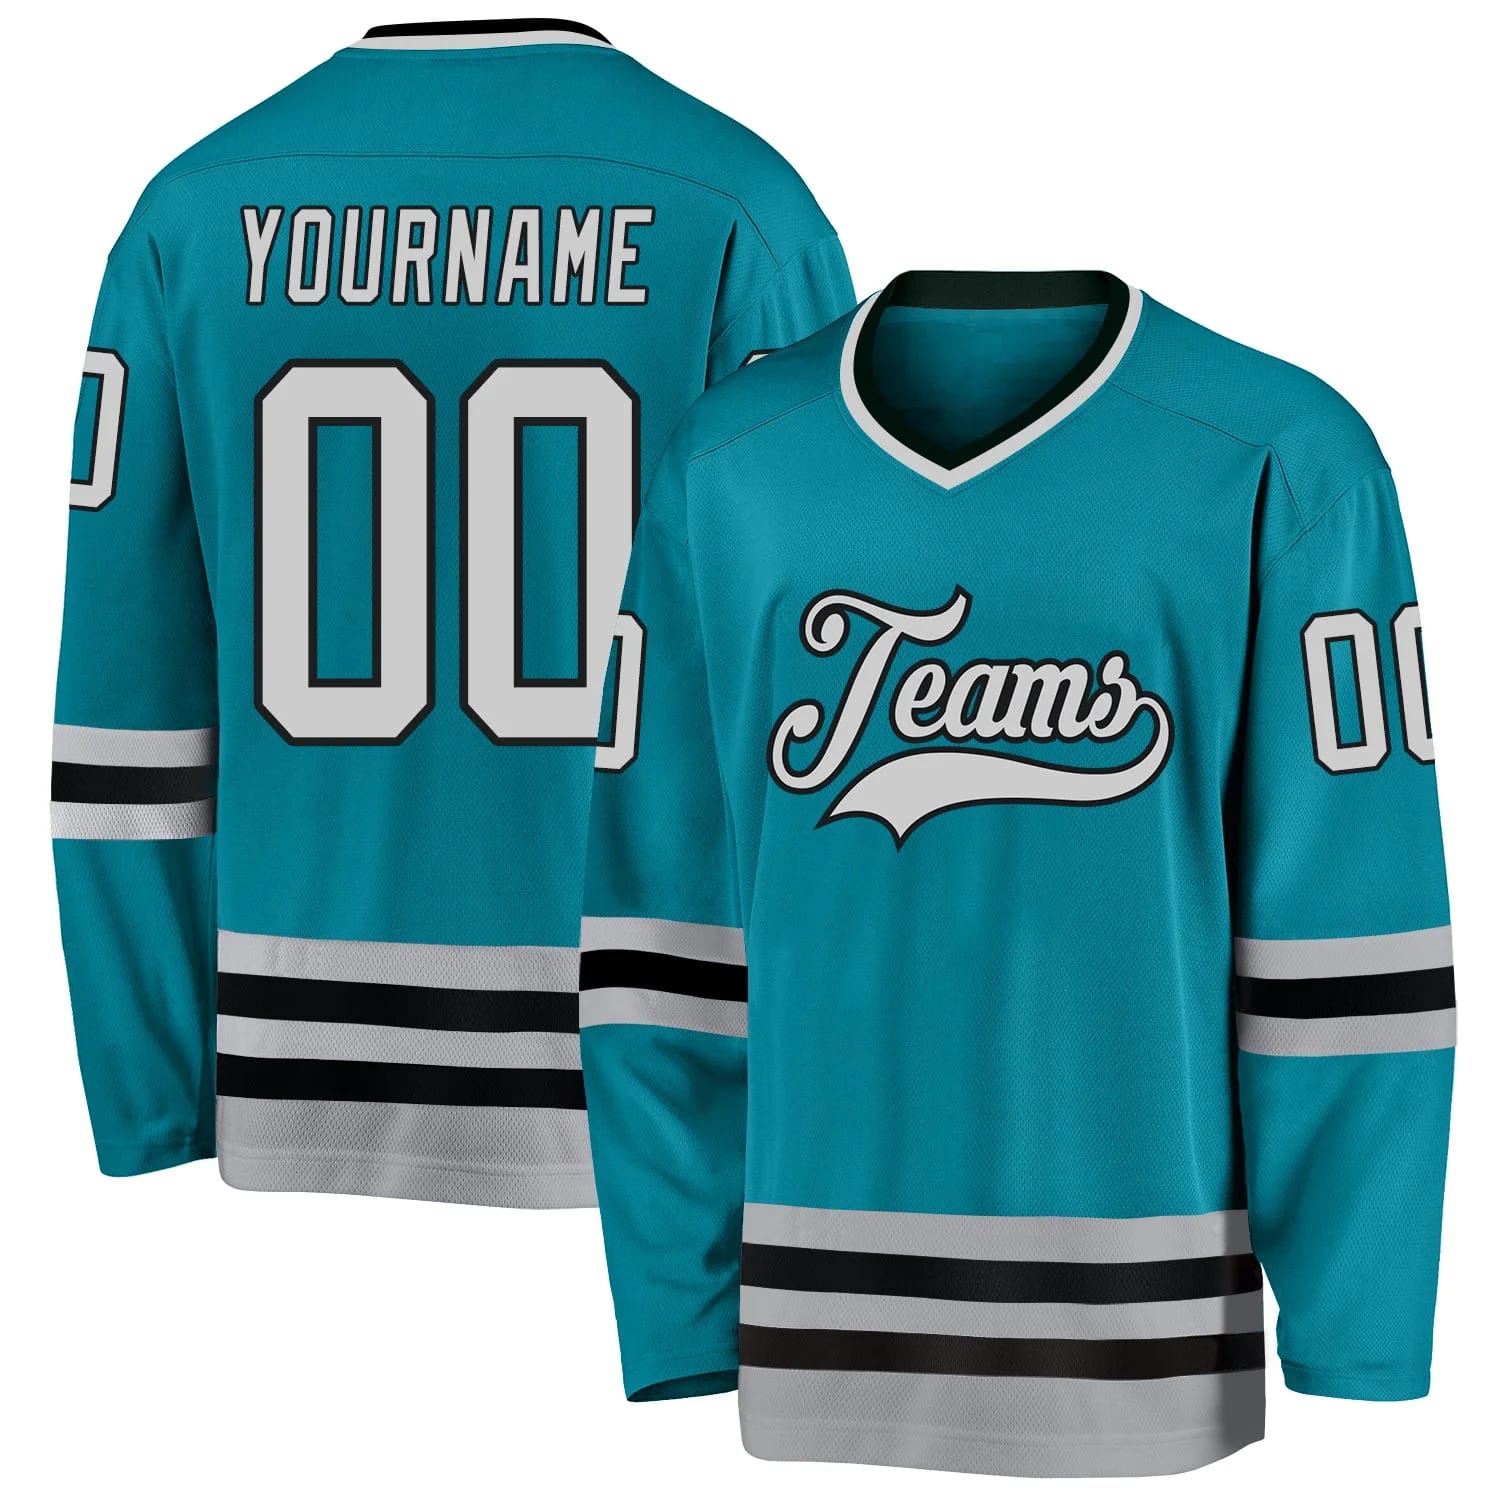 Stitched And Print Teal Gray-black Hockey Jersey Custom